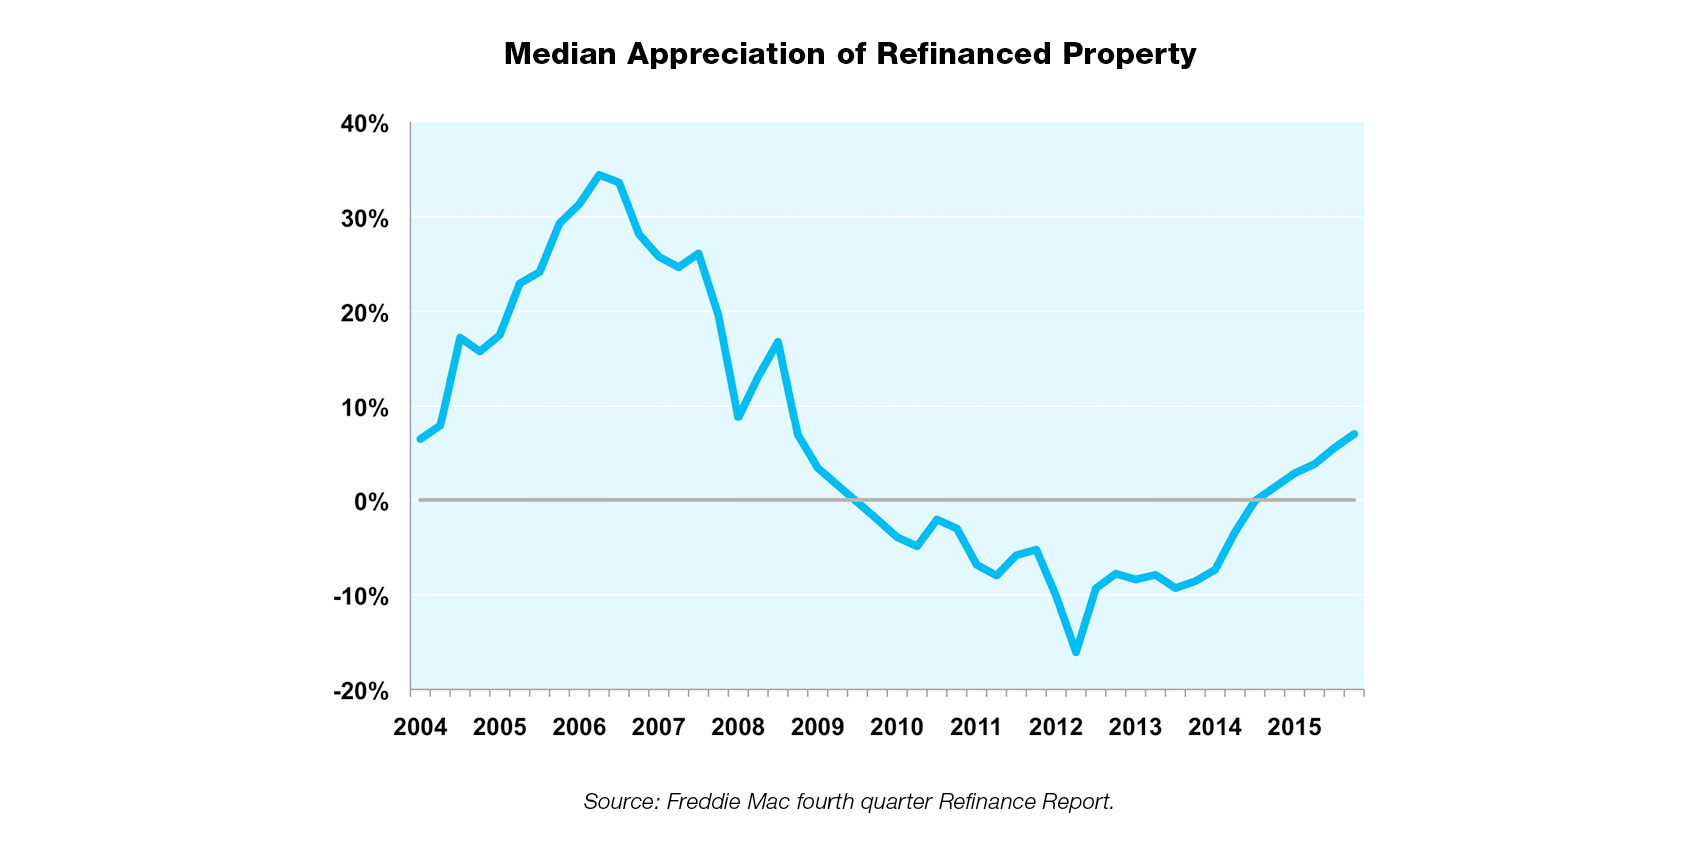 Line chart showing the median appreciation of refinanced property from 2004 to 2015